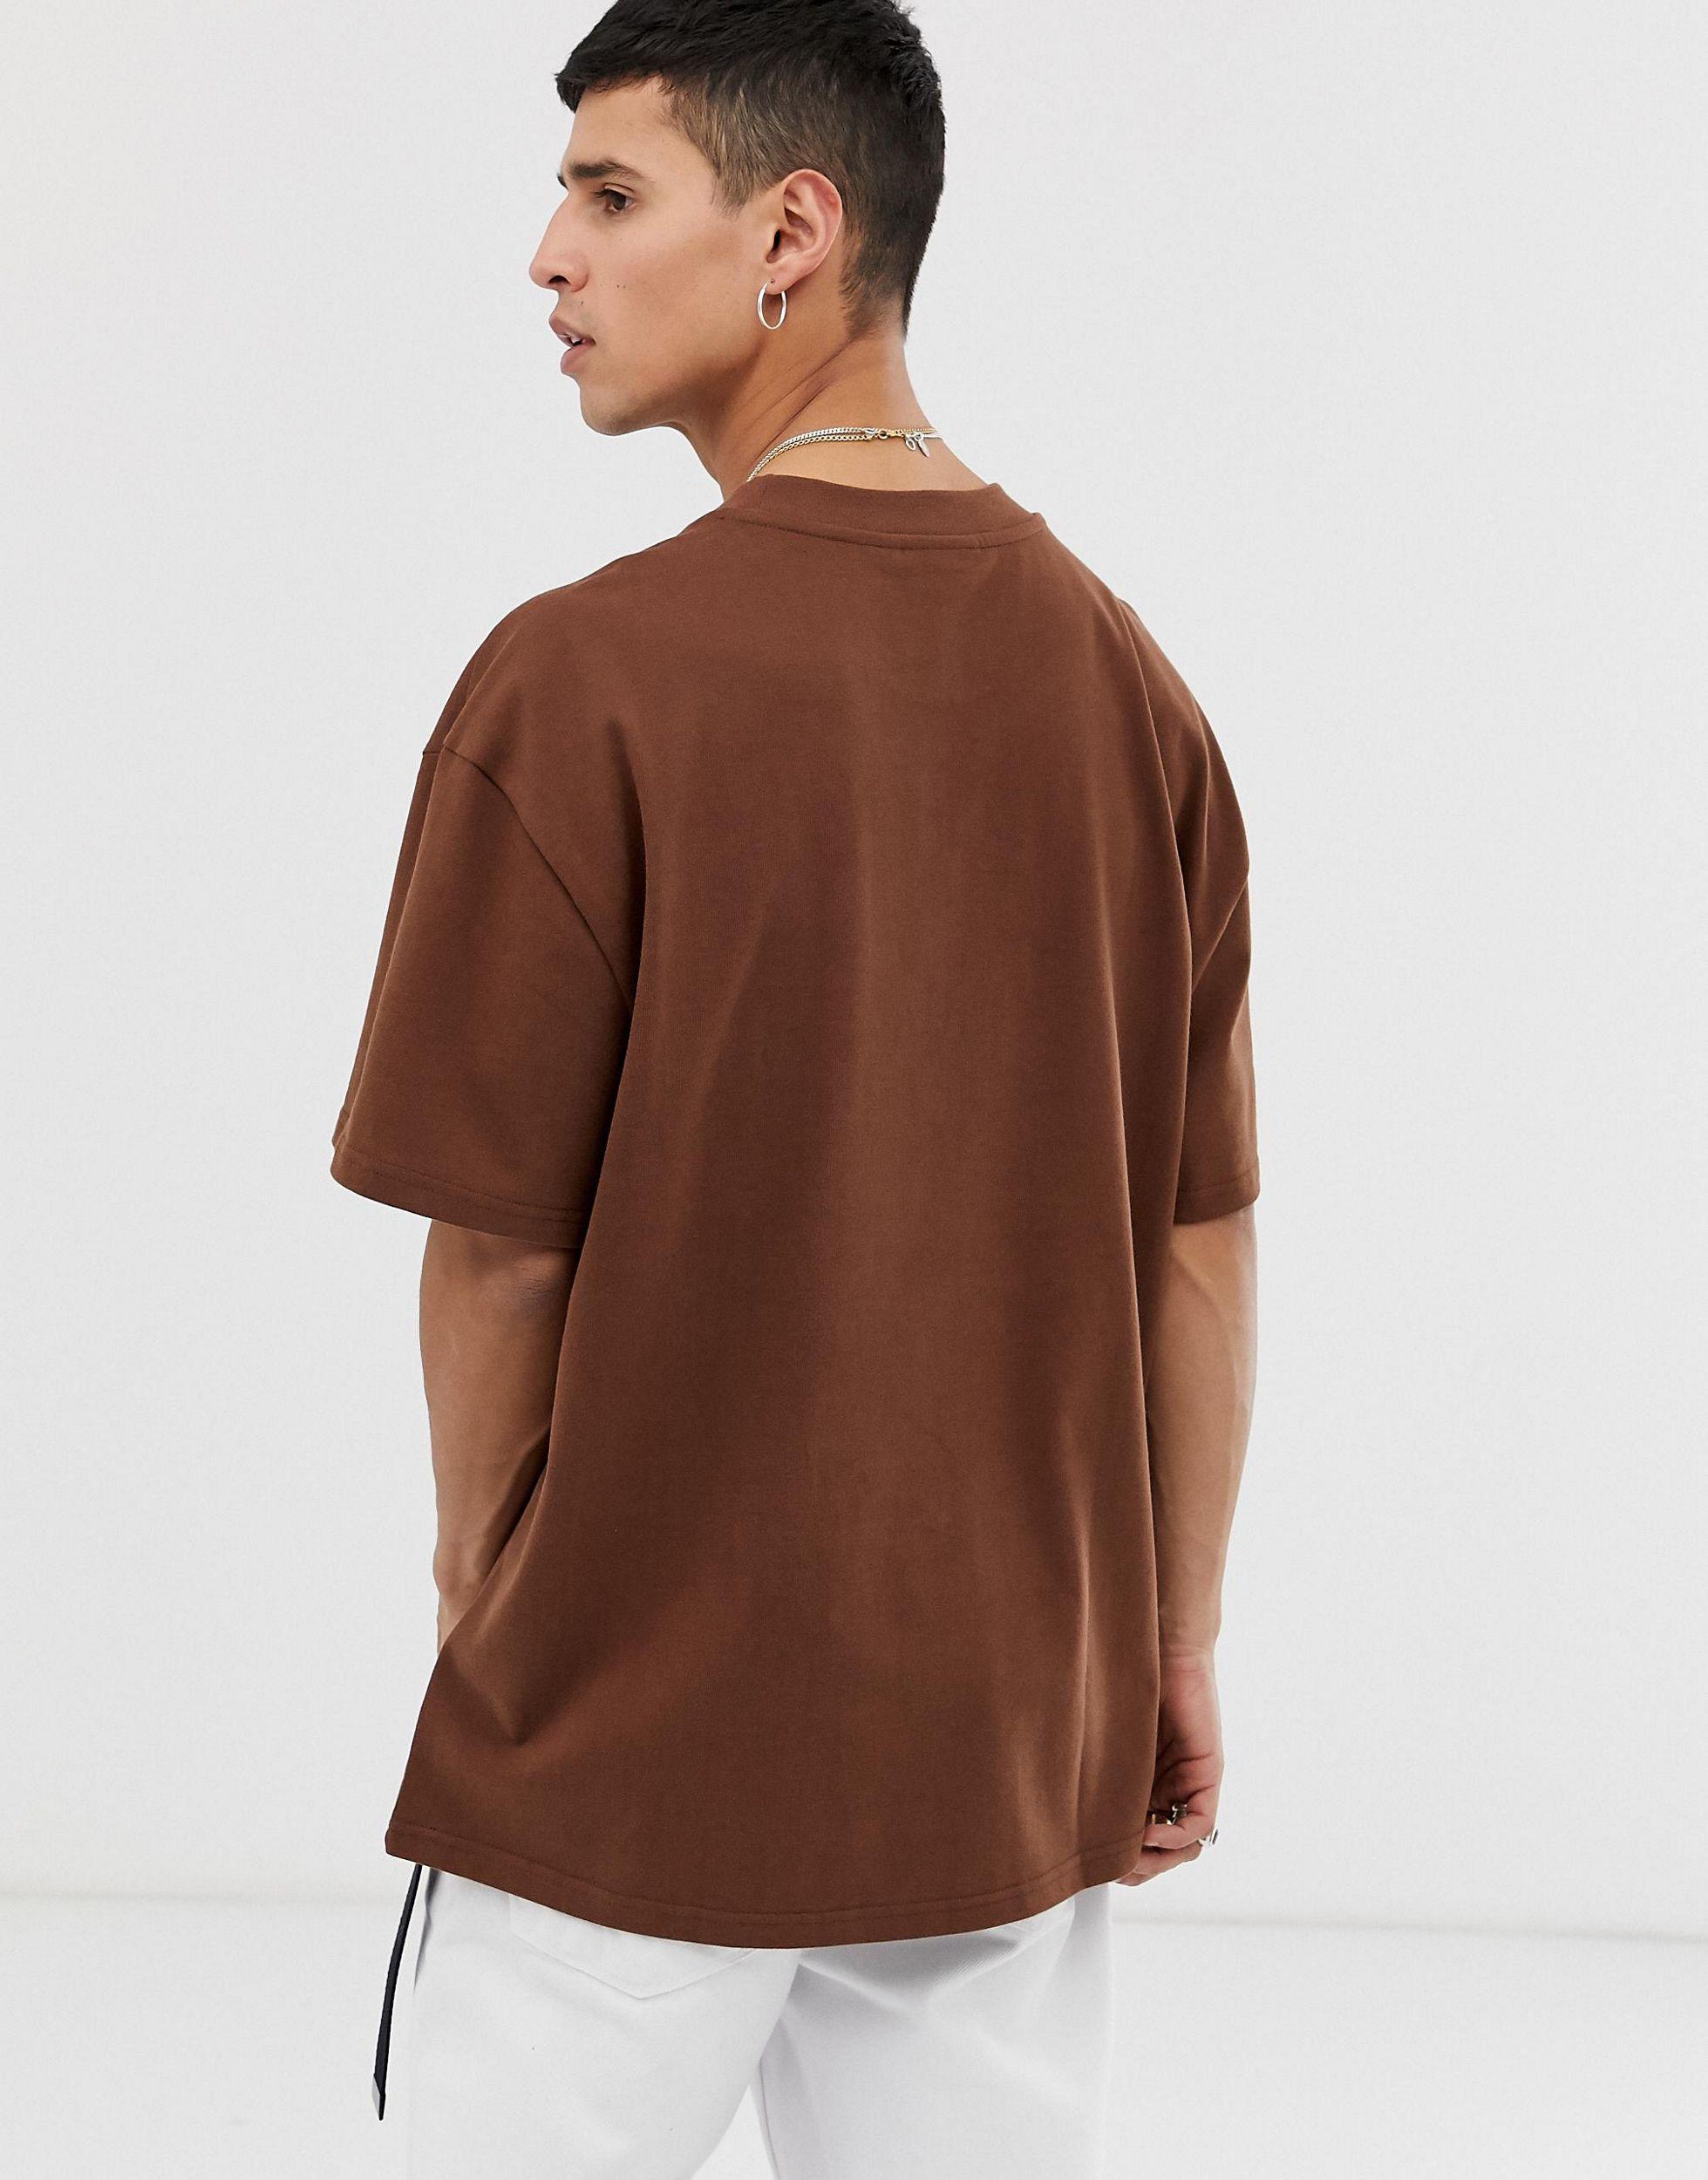 Weekday Denim Great Oversized T-shirt in Brown for Men - Lyst